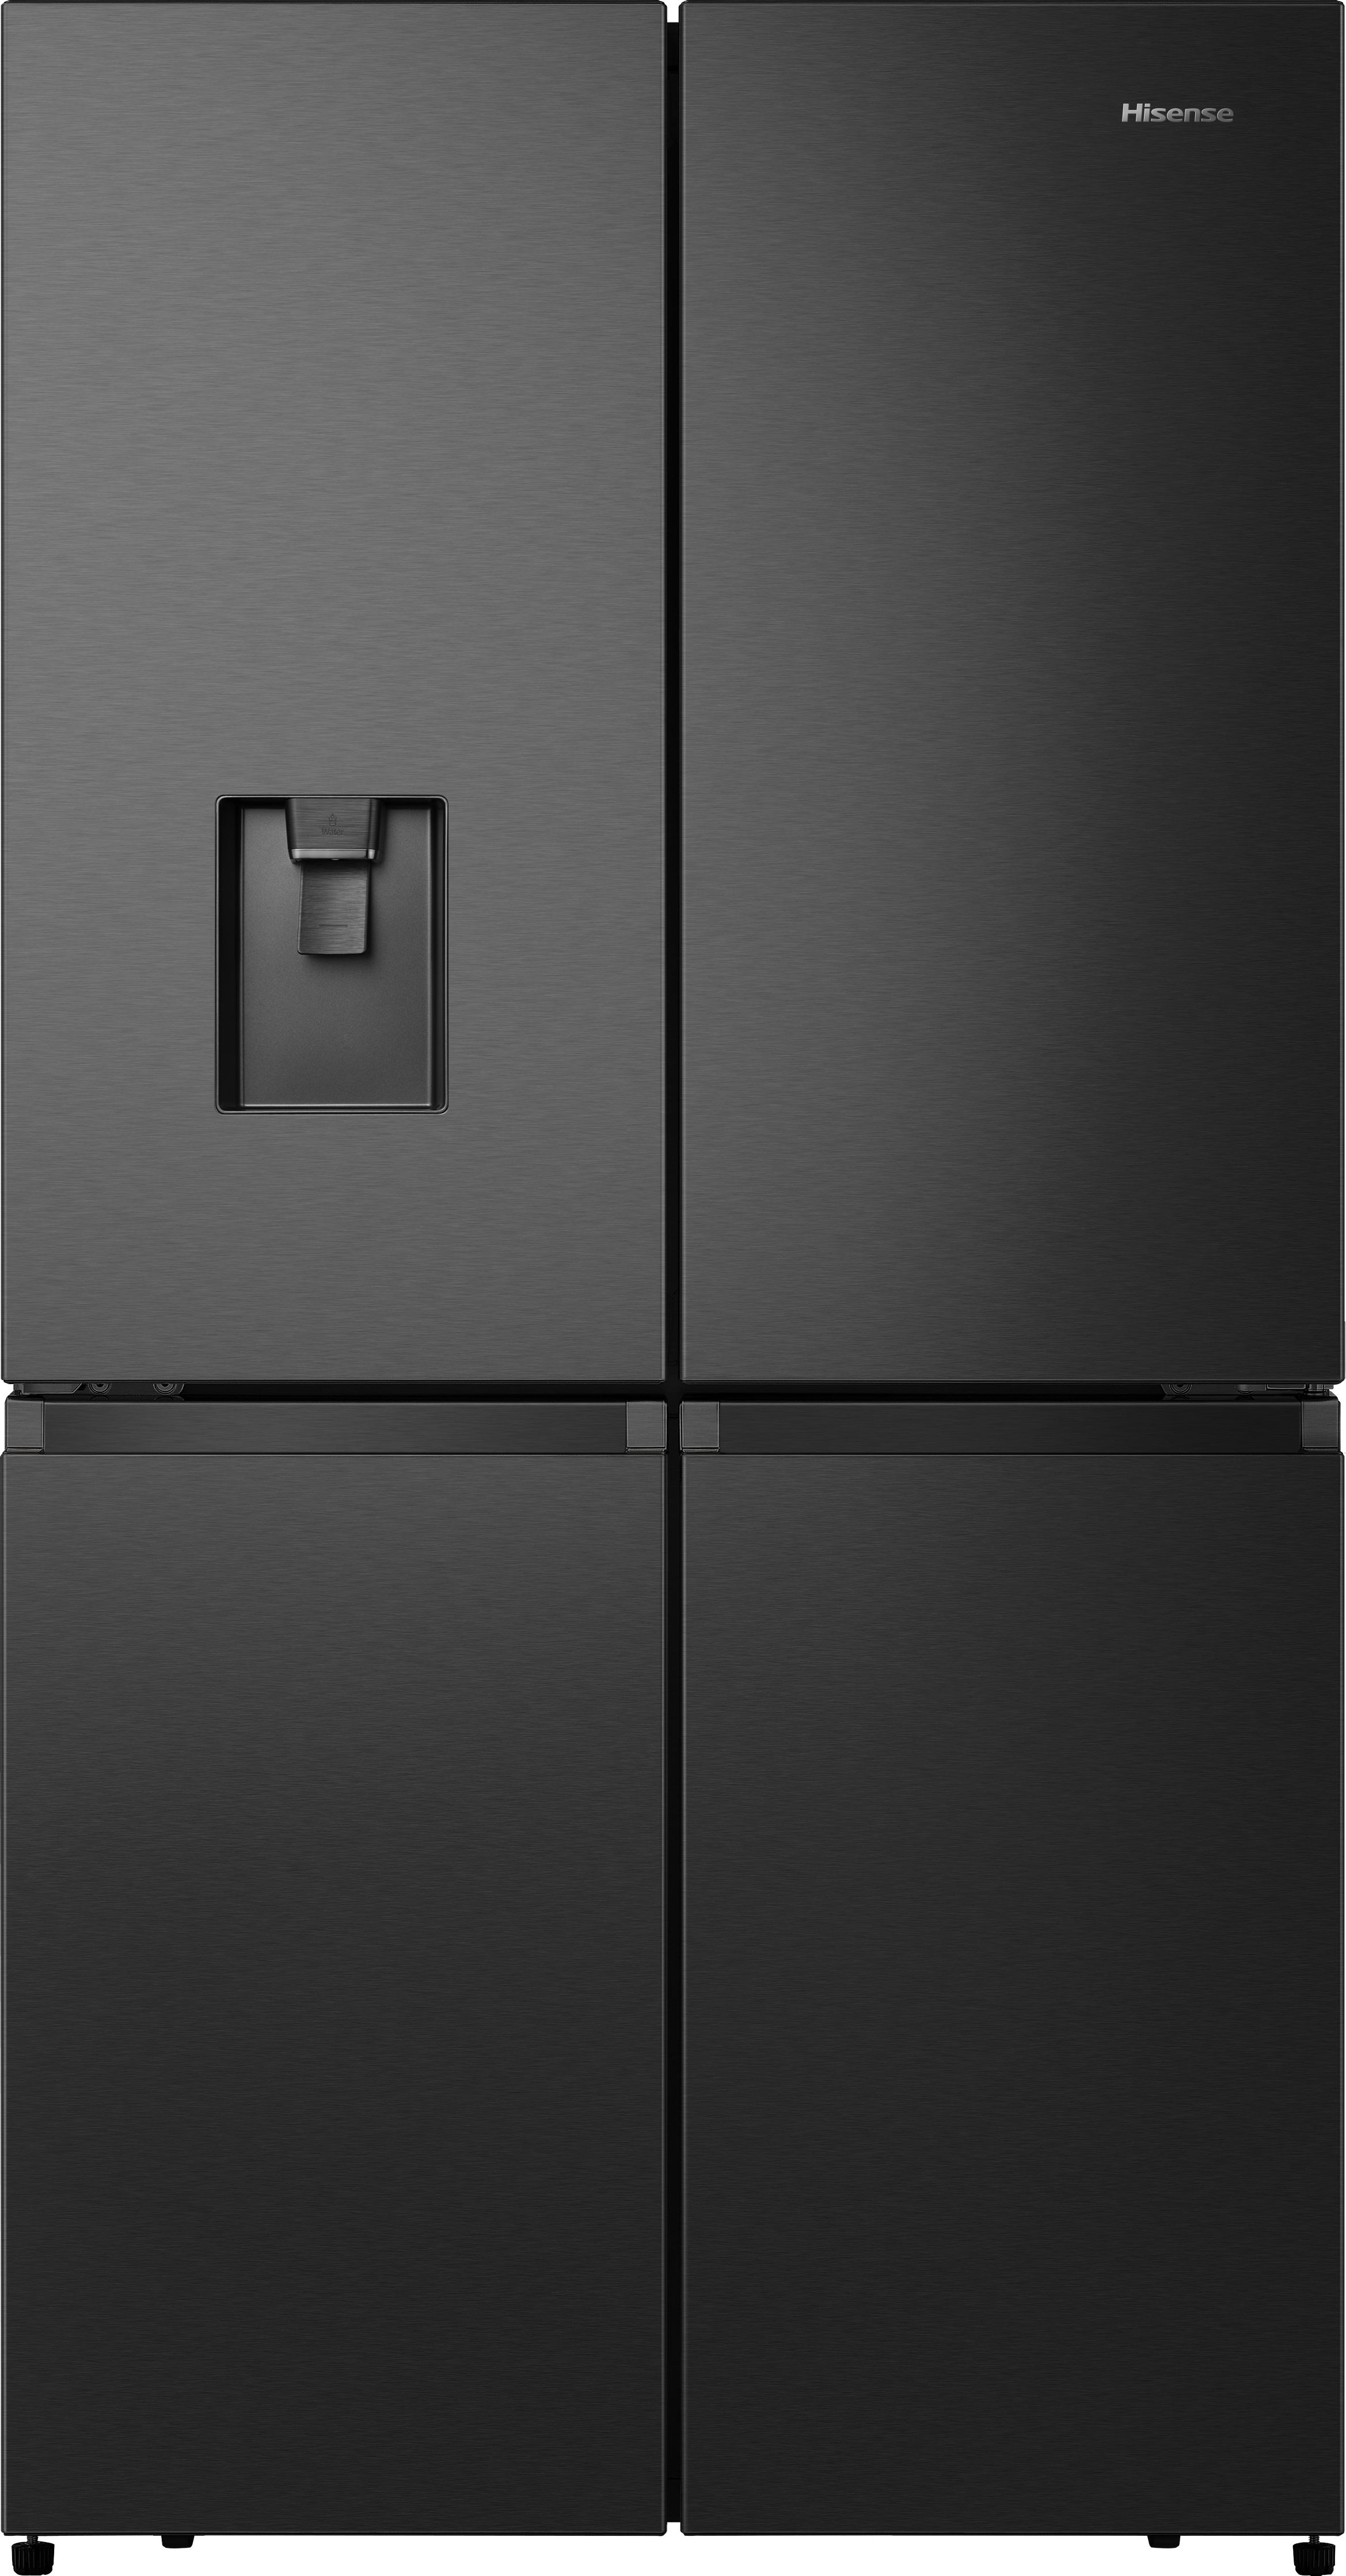 Hisense RQ758N4SWFE Wifi Connected Total No Frost American Fridge Freezer - Black Stainless Steel - E Rated, Black